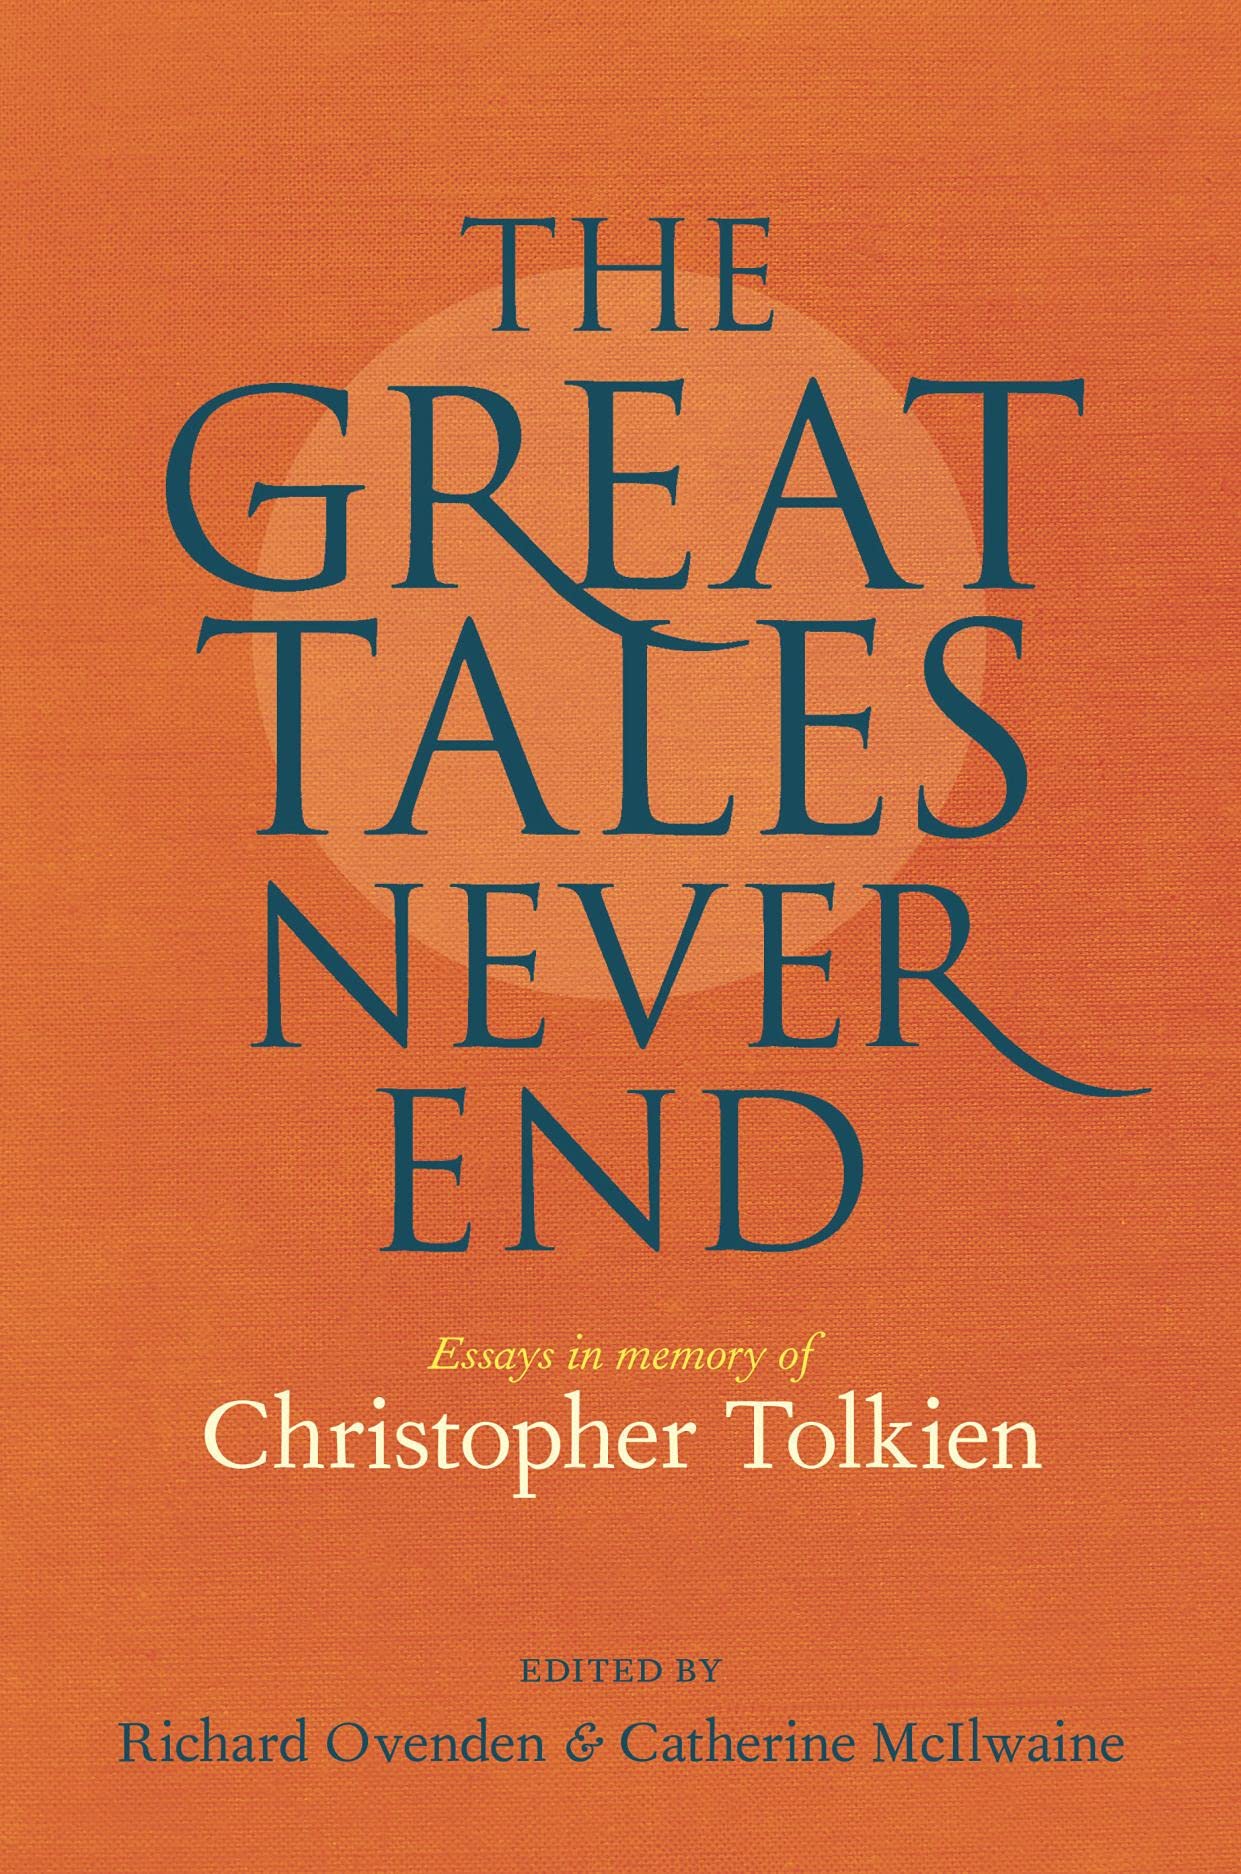 The Great Tales Never End: Essays in Memory of Christopher Tolkien by Tom Shippey, Richard Ovenden, Wayne G. Hammond, Catherine McIlwaine, Maxime H. Pascal, Priscilla Tolkien, Vincent Ferré, Carl F. Hostetter, Stuart D. Lee, John Garth, Brian Sibley, Verlyn Flieger, Christina Scull